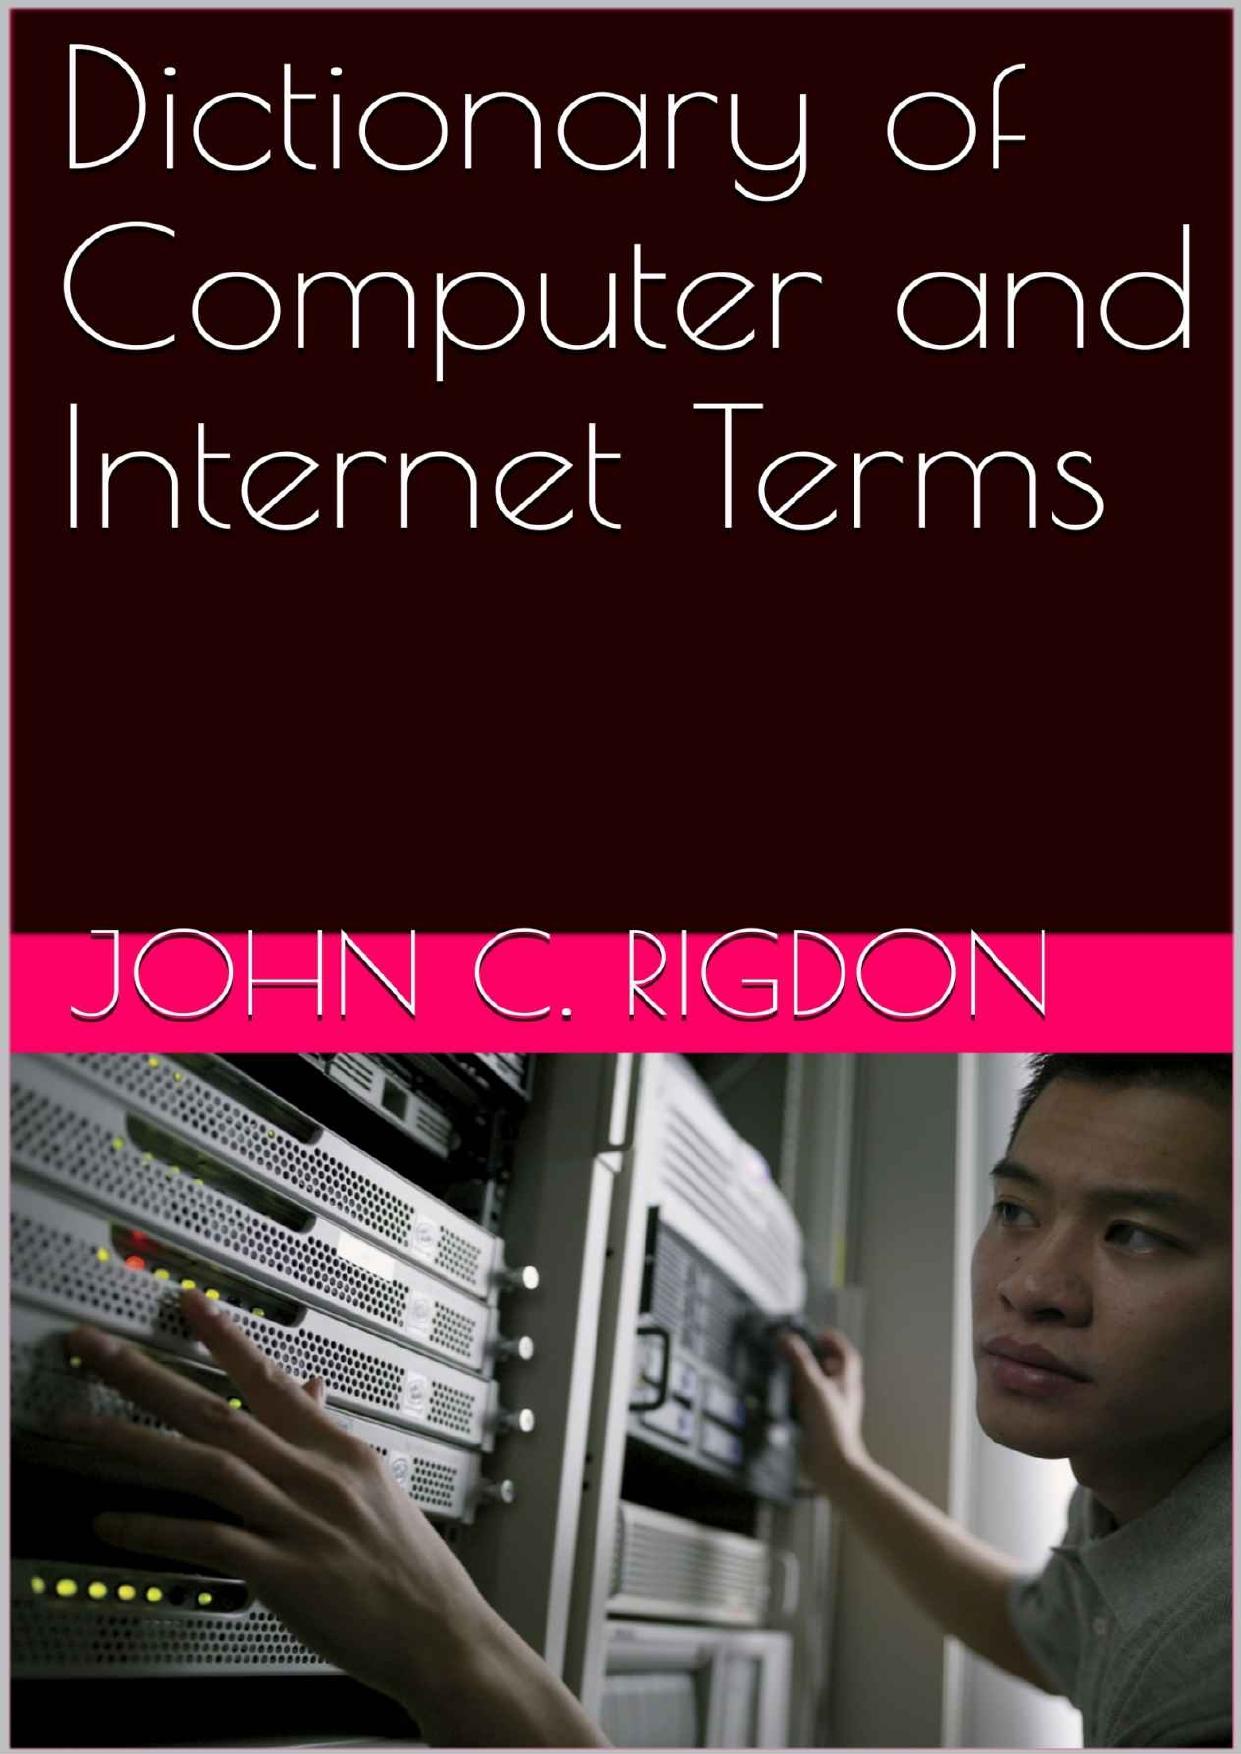 Dictionary of Computer and Internet Terms (Words R Us Computer Dictionaries Book 1)